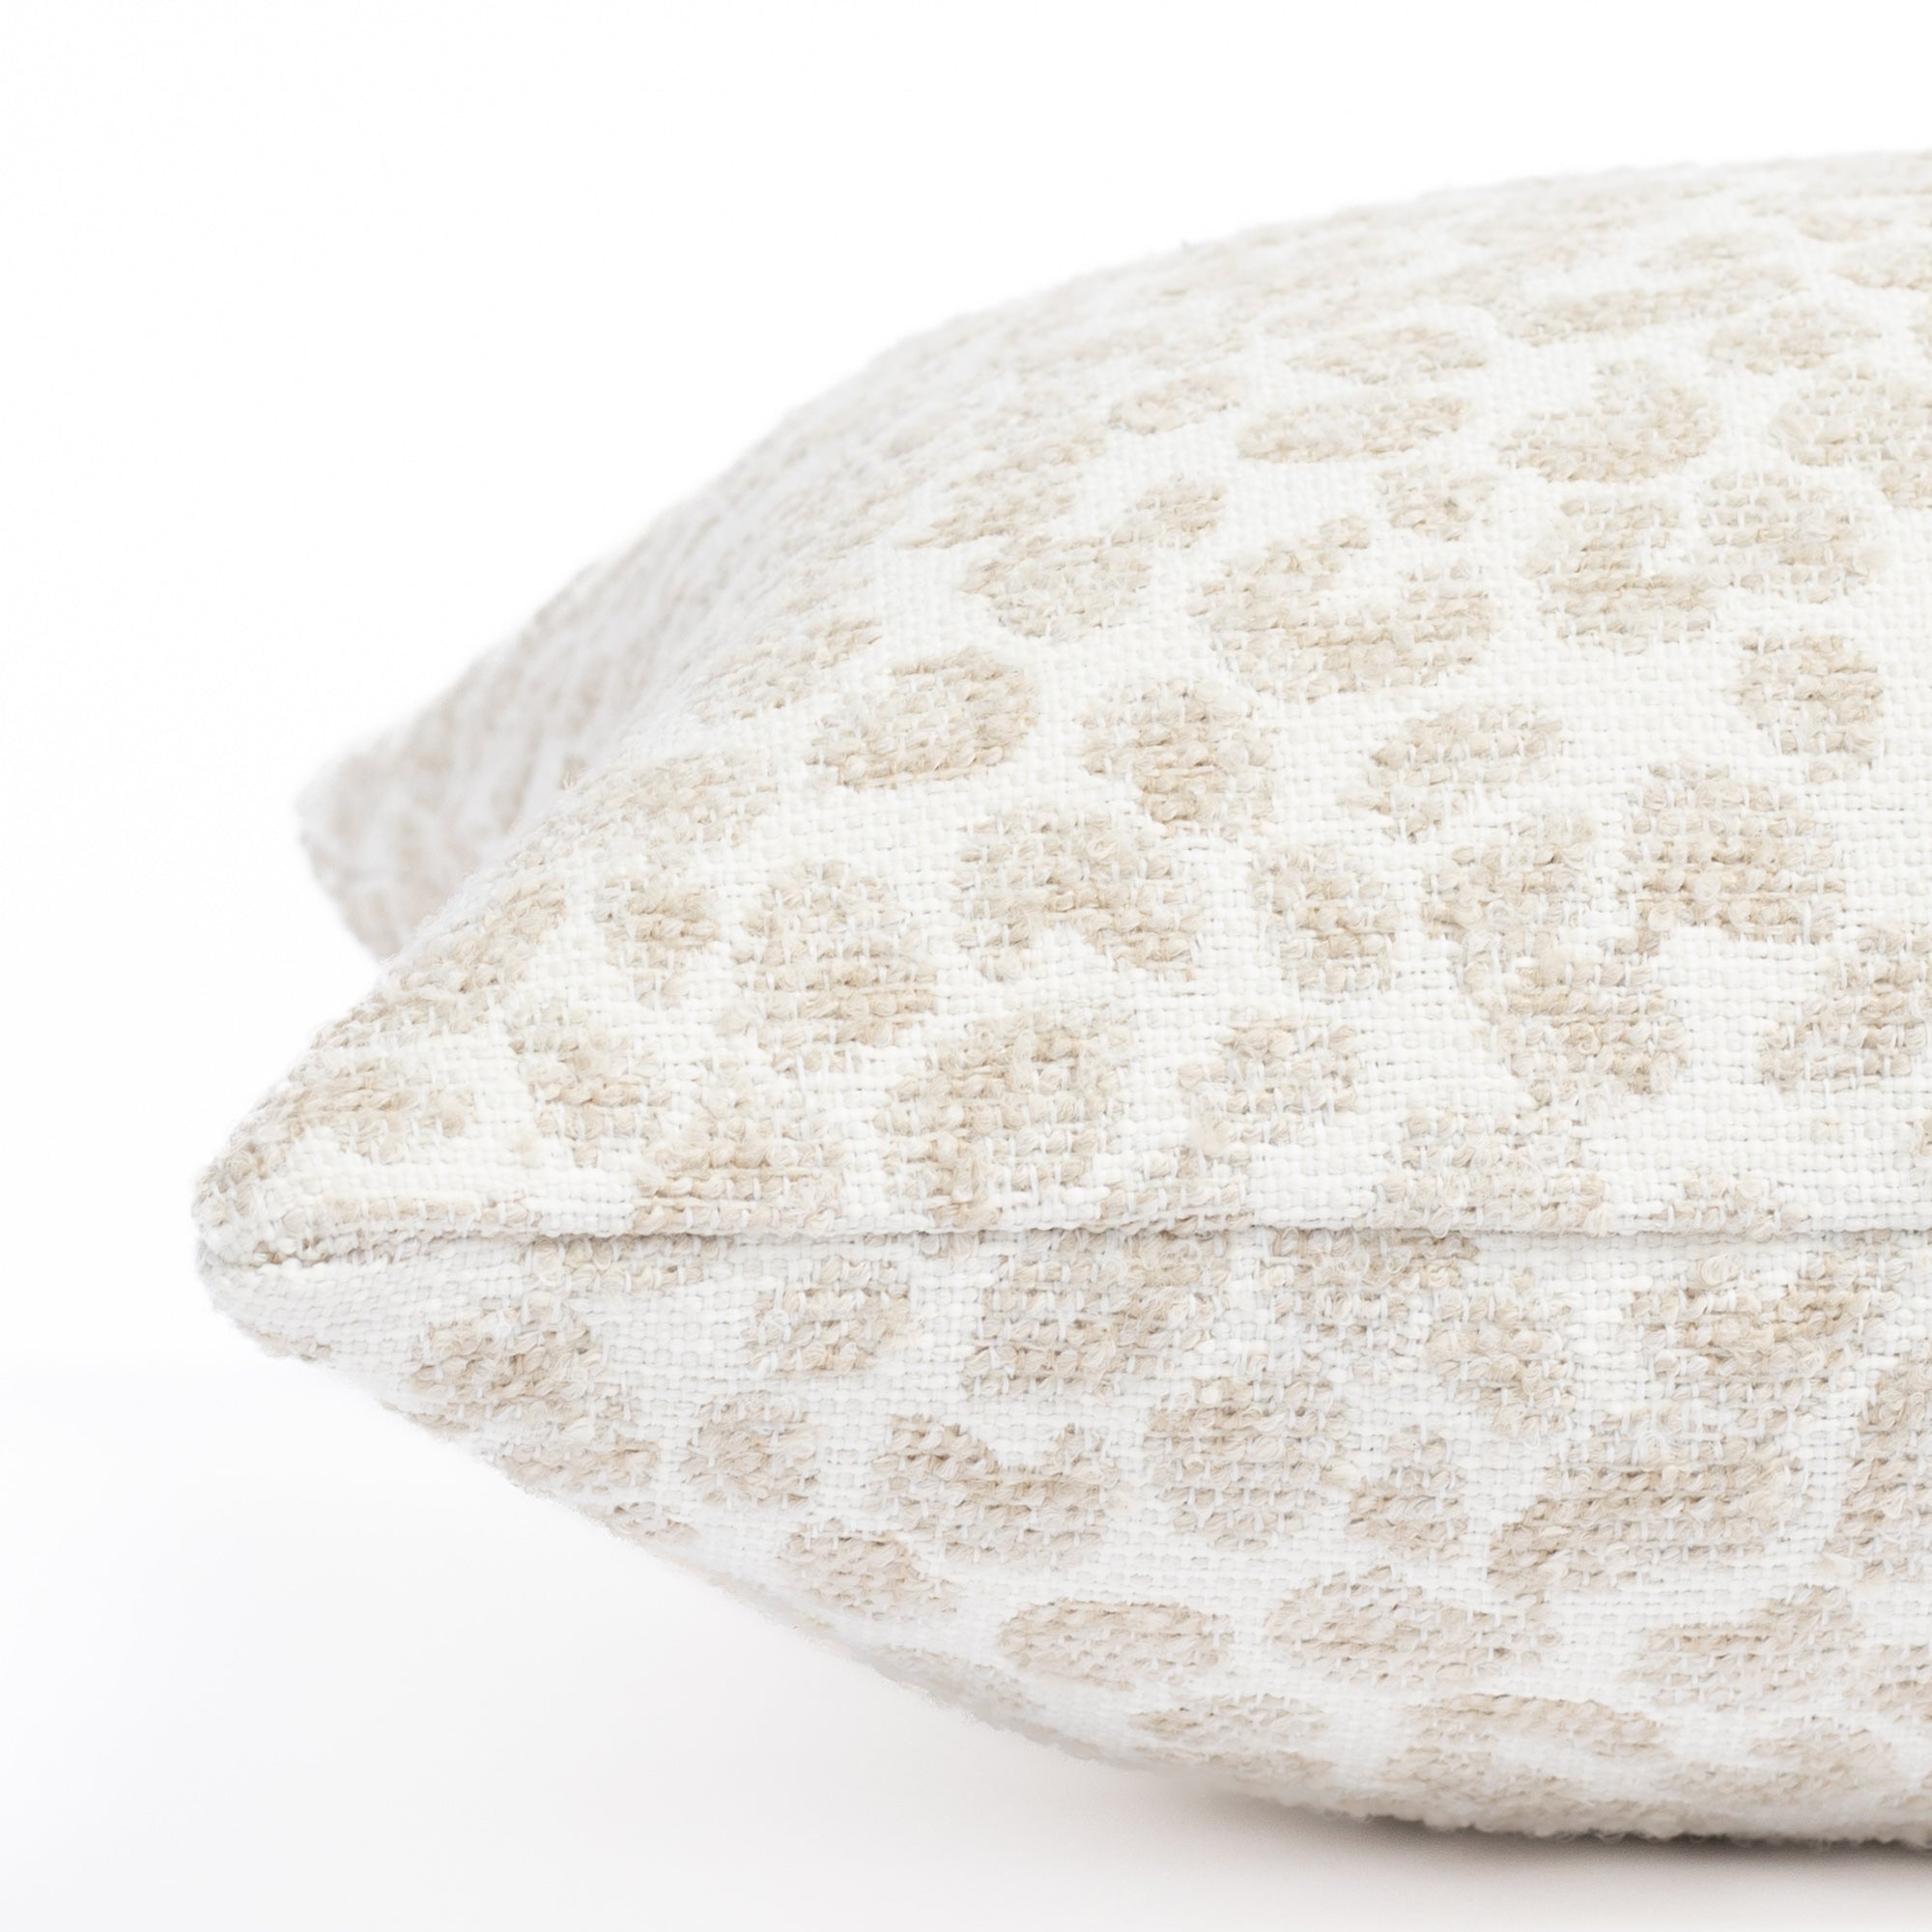 a white, cream and taupe specked cheetah patterned indoor outdoor lumbar pillow : close up side view